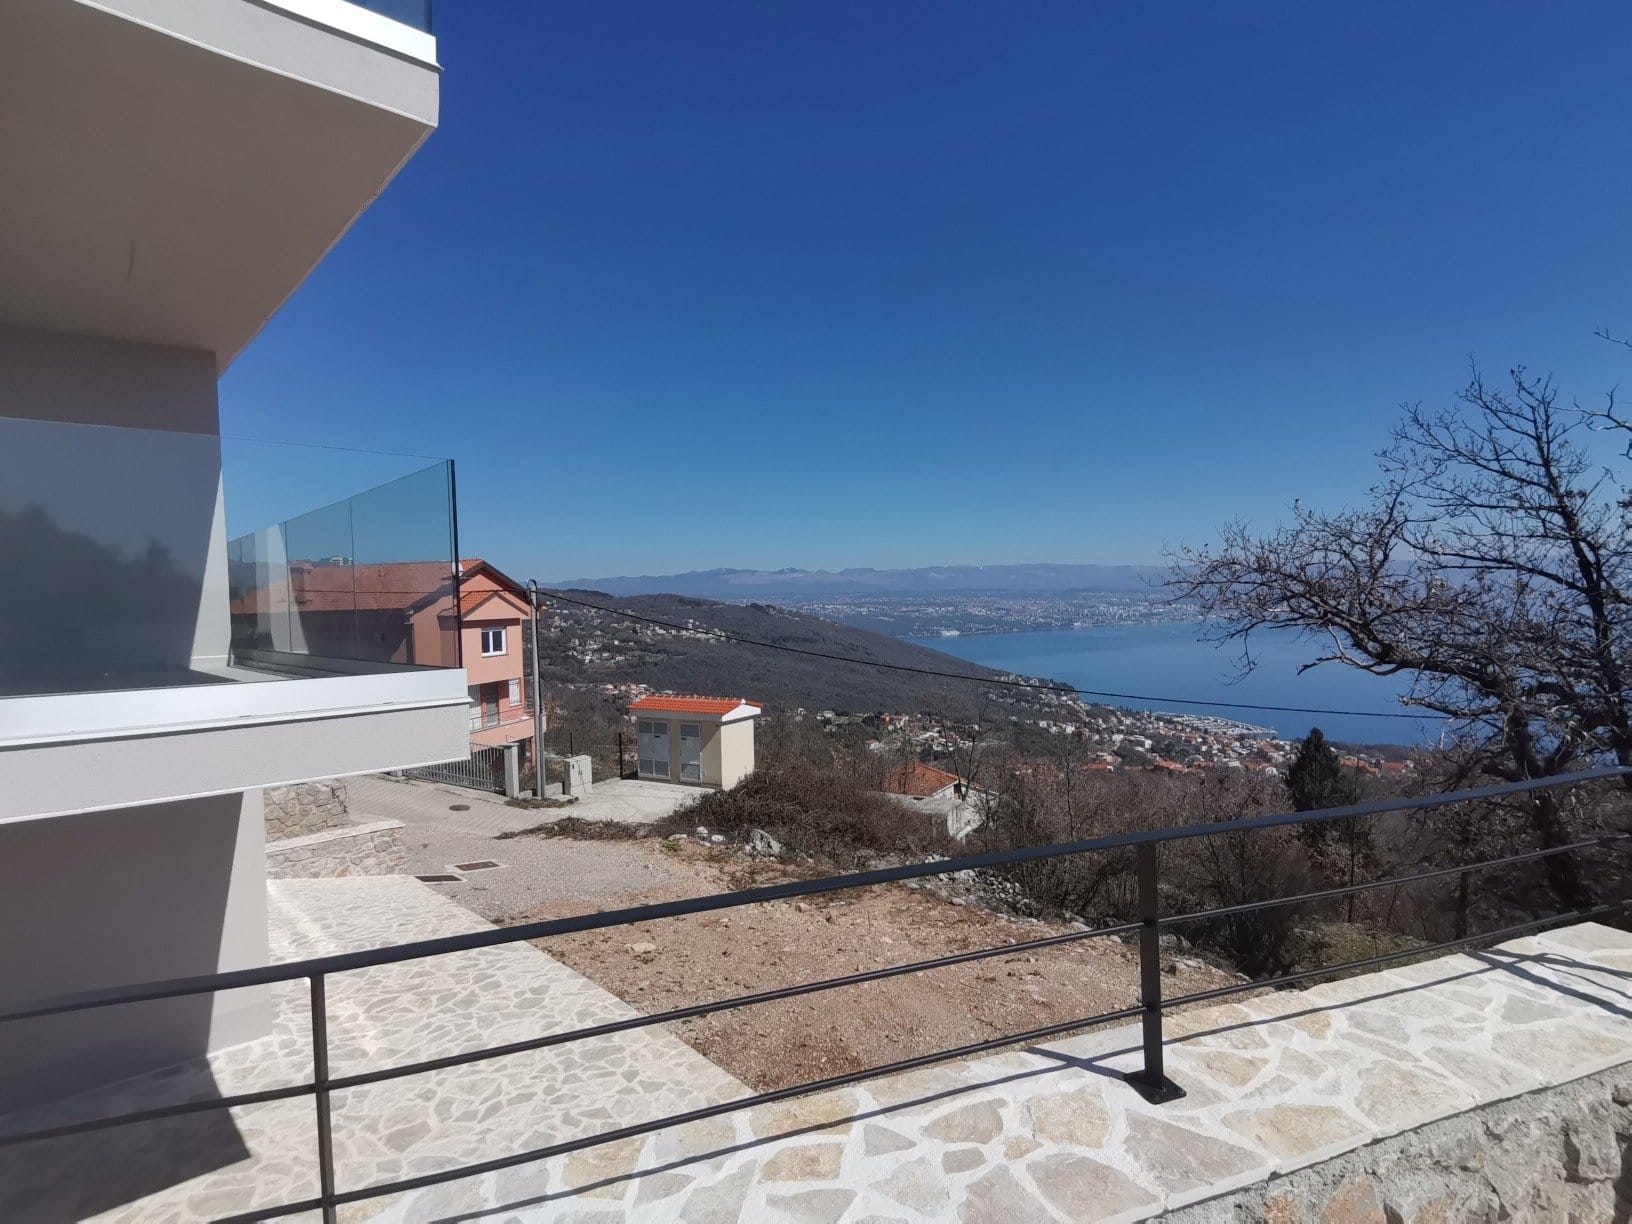 KB-461 newly built semi-detached houses with pool near Opatija with beautiful sea views